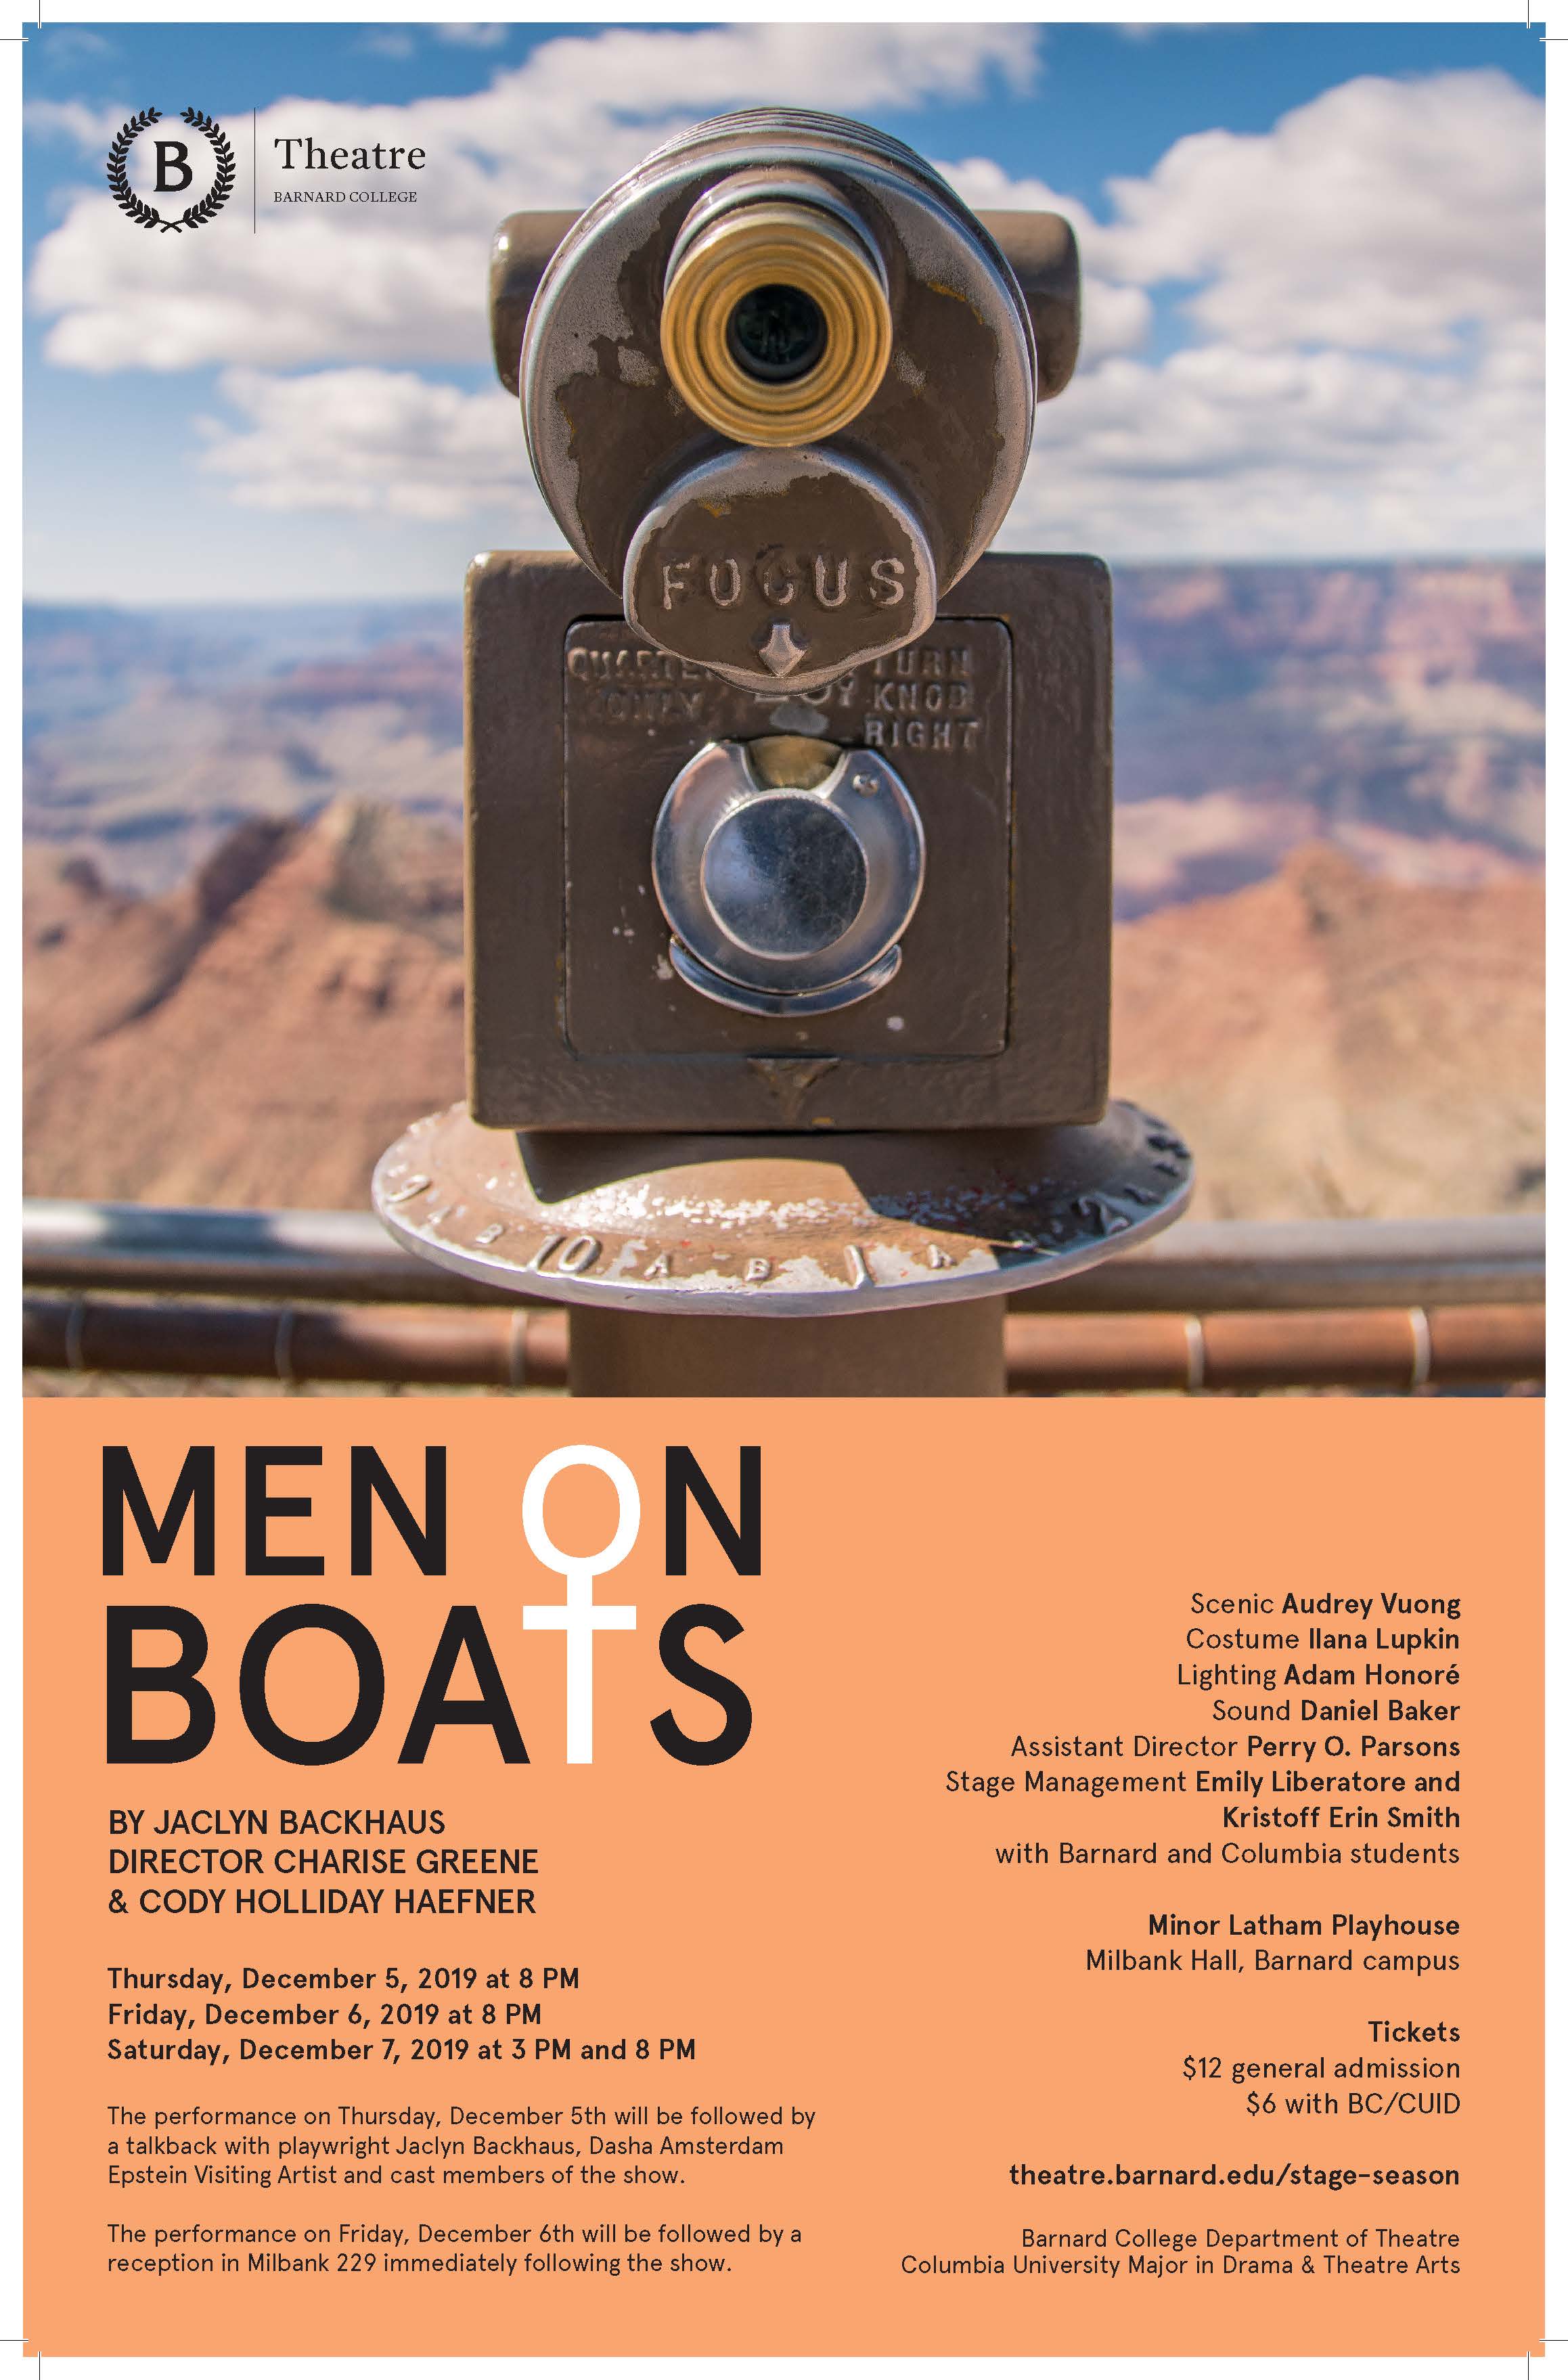 Men on Boats poster